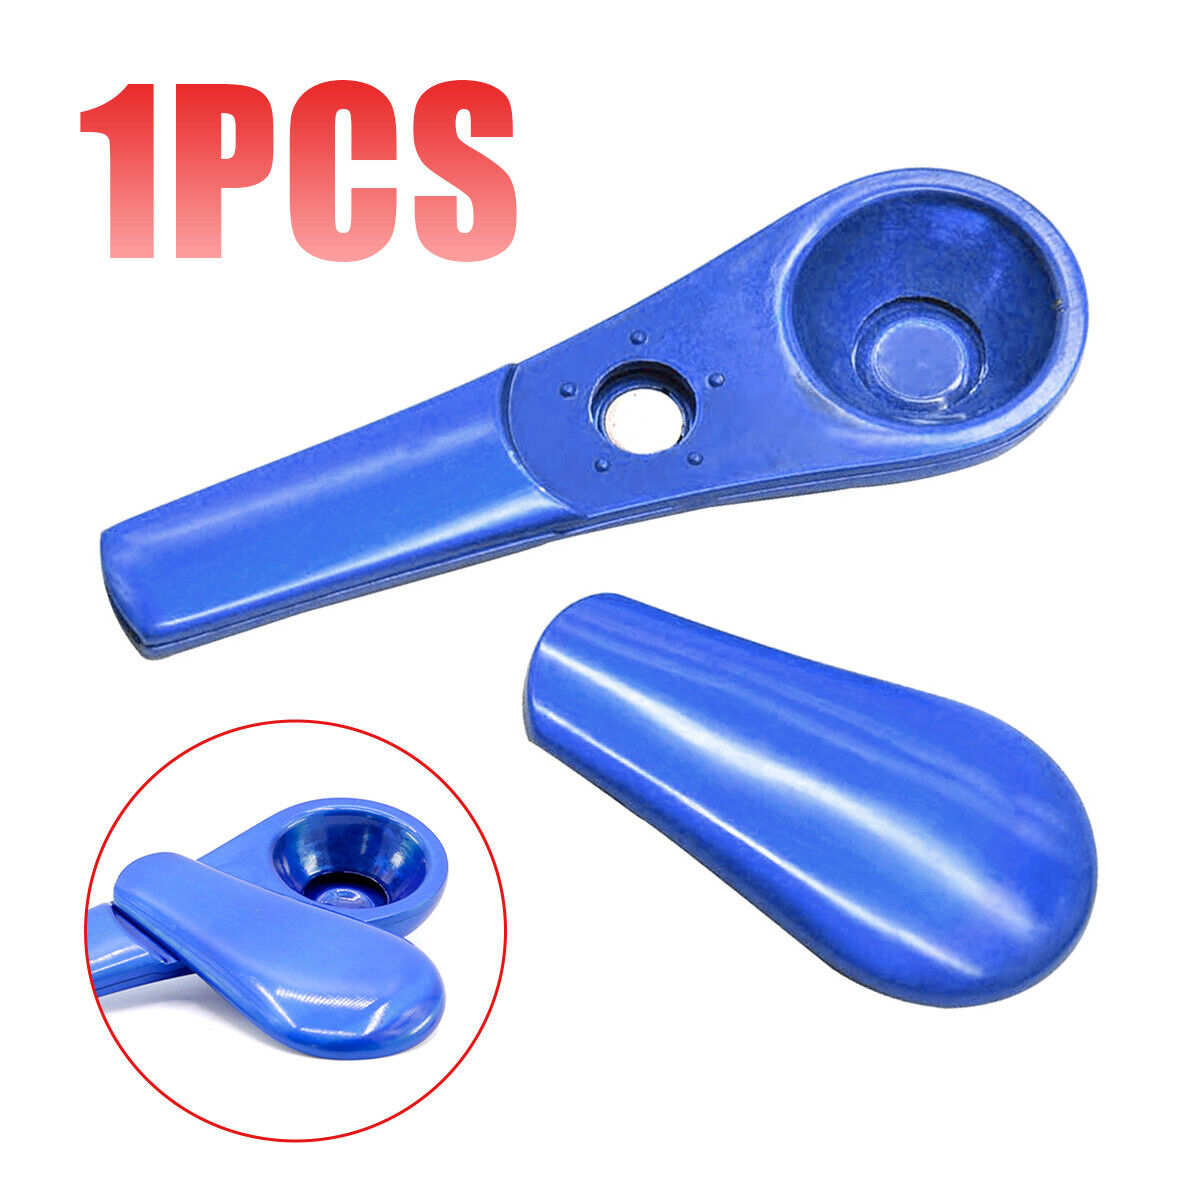 Portable Magnetic Metal Spoon Smoking Pipe Silver With Gift Box - Blue